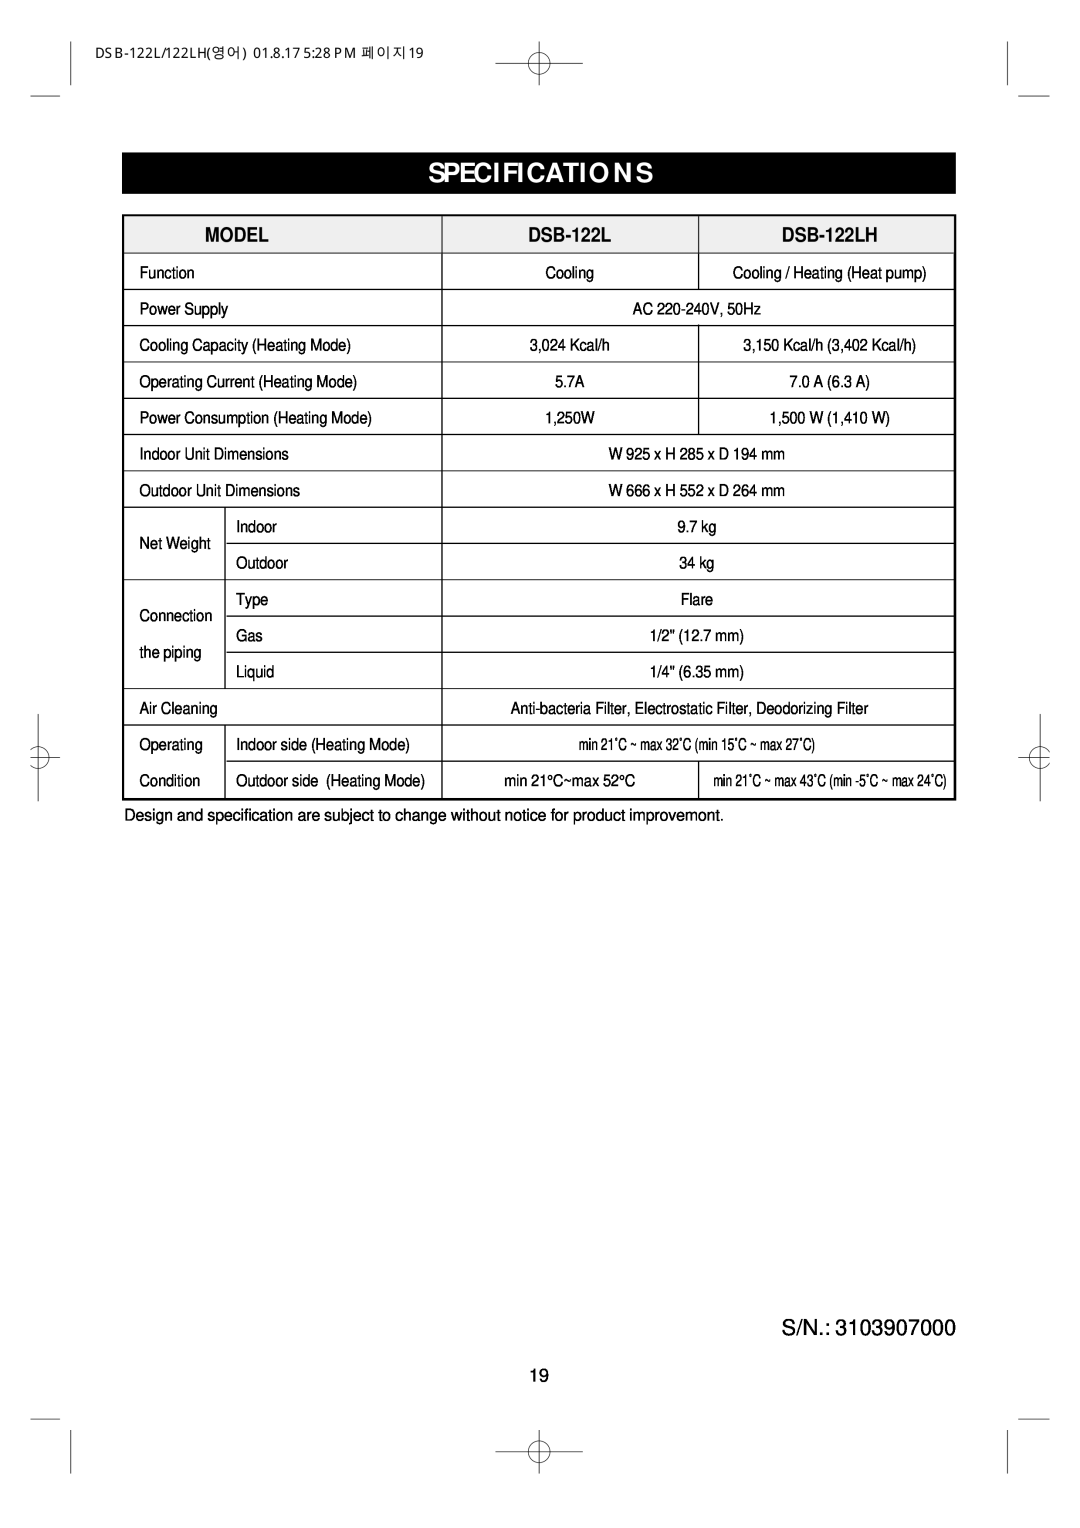 Daewoo DSB-122LH owner manual Specifications, Model 